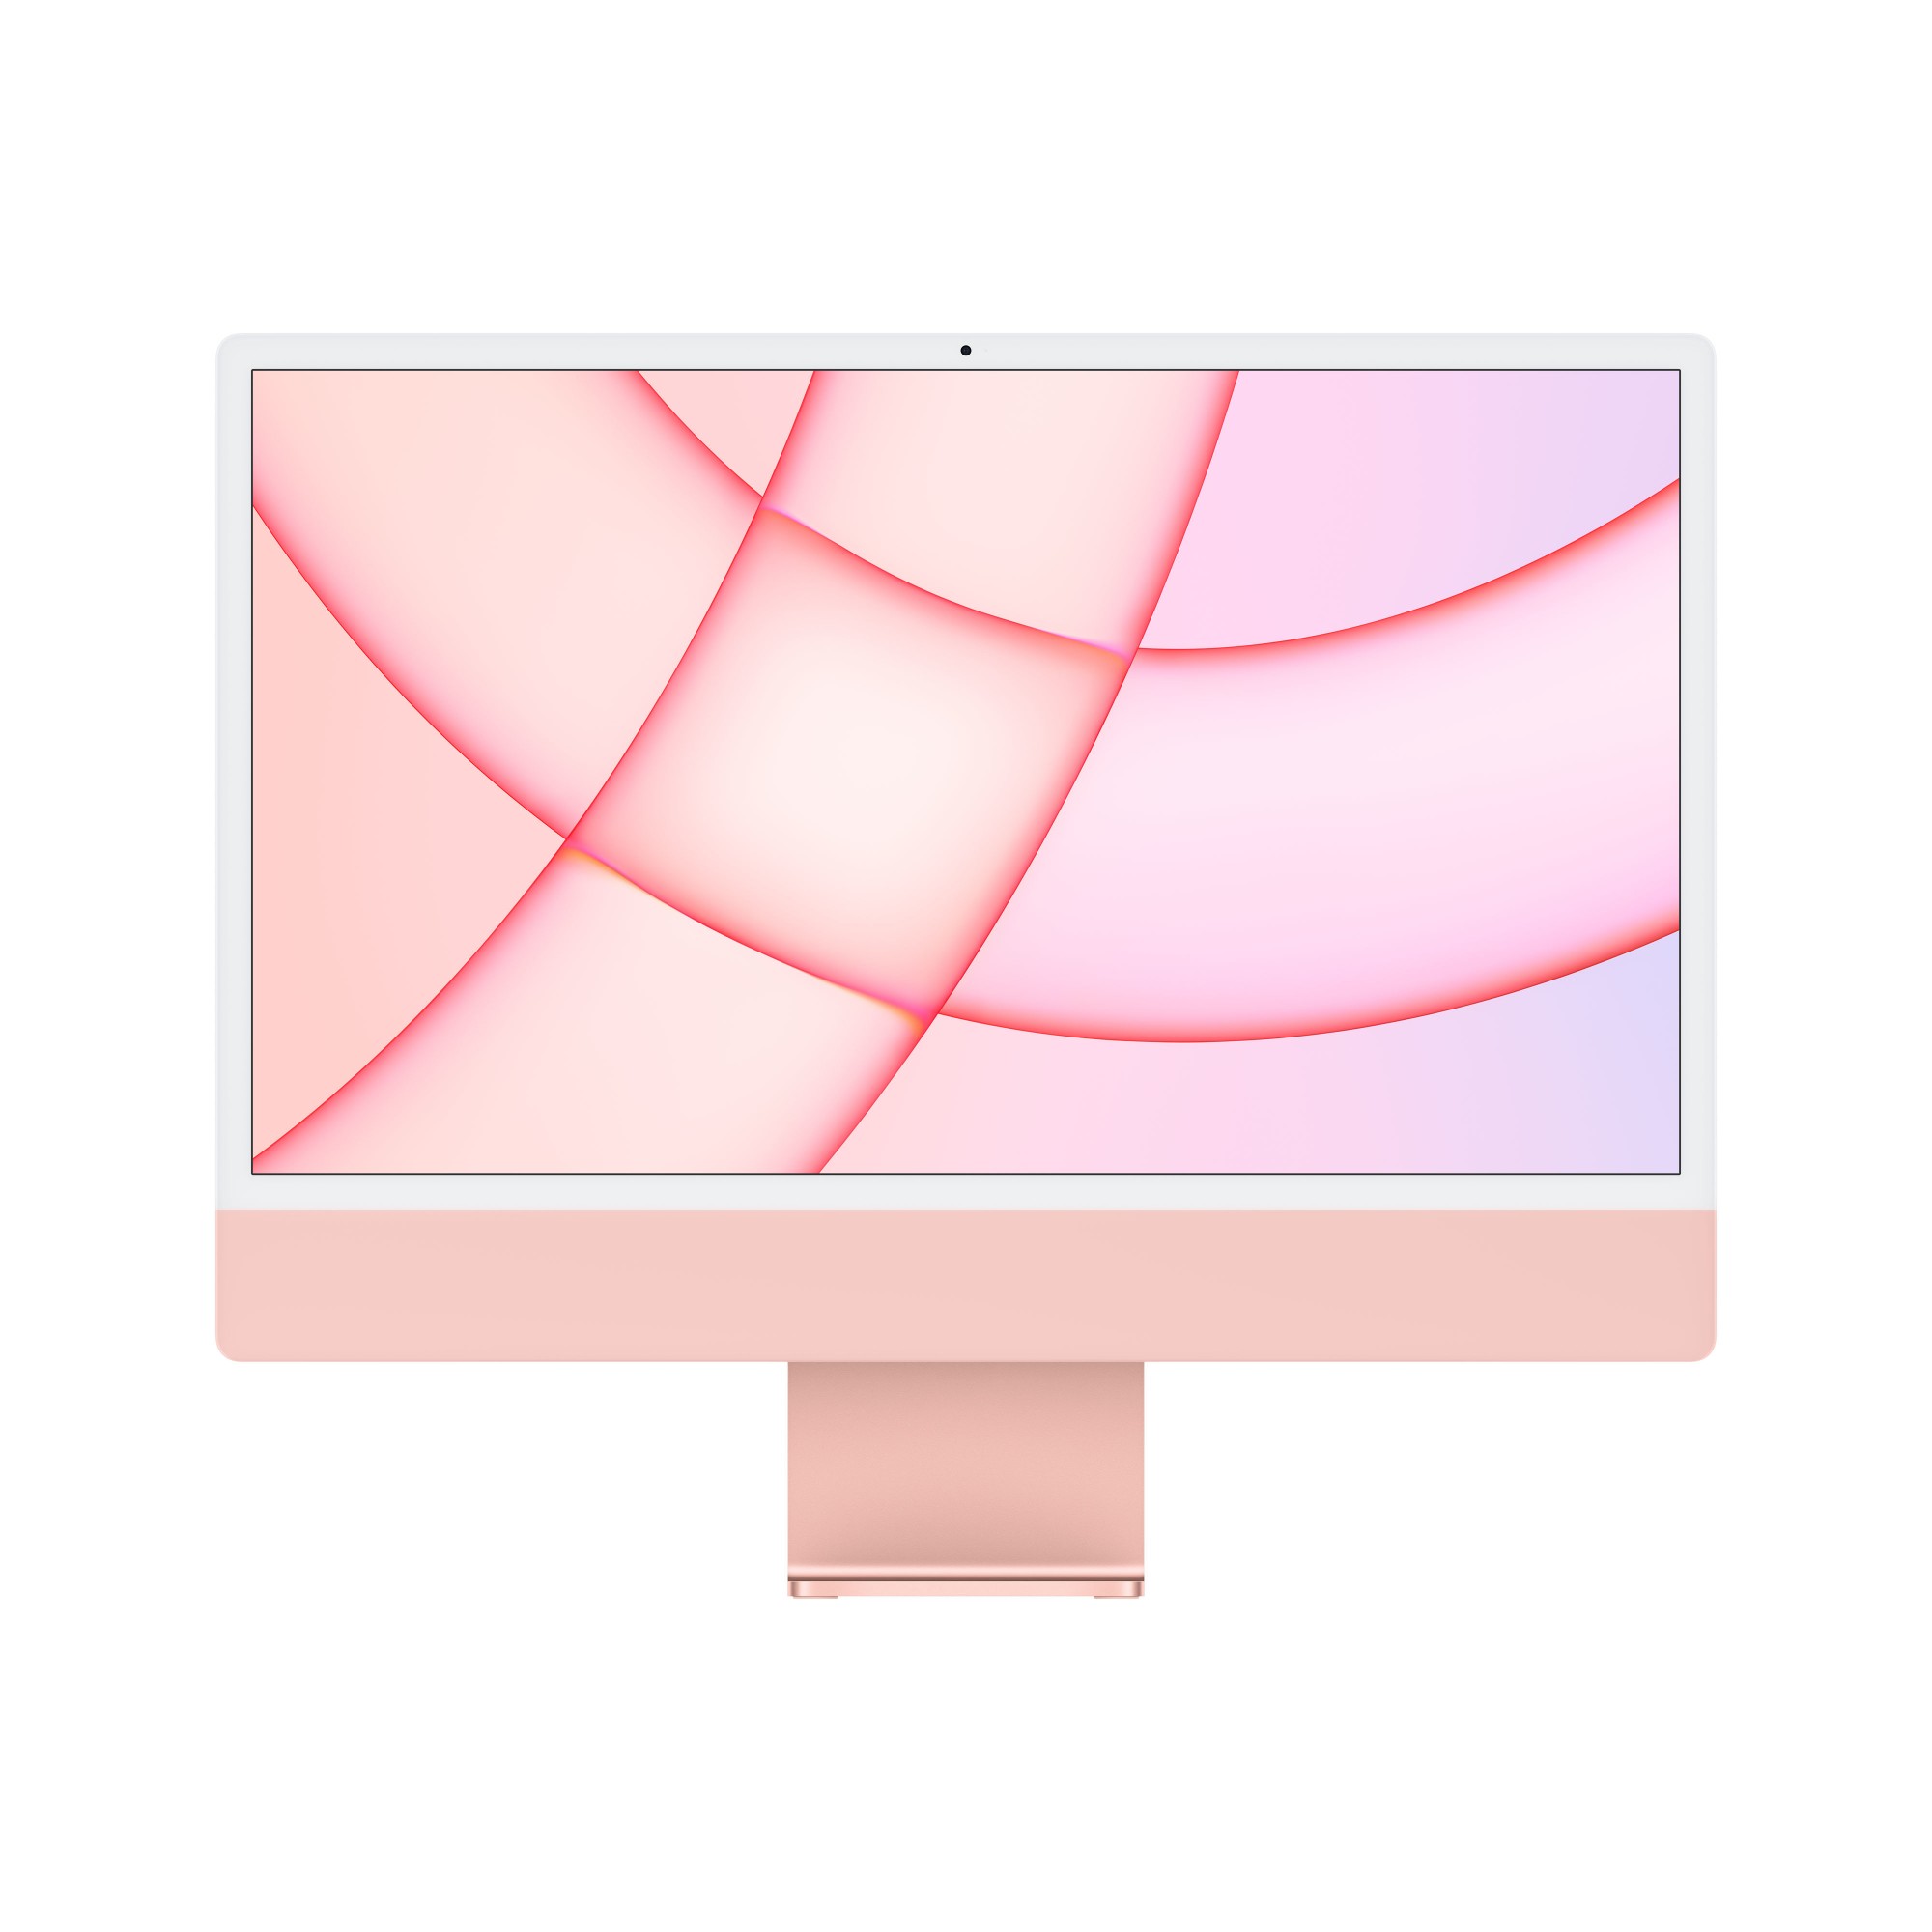 iMac, 24", Pink, Apple M1 chip with 8-core CPU with 4 performance cores and 4 efficiency cores, 8-core GPU and 16-core Neural Engine, 8GB unified memory, 256GB SSD storage, Magic Mouse, Magic Keyboard with Touch ID - British, UK Power Supply